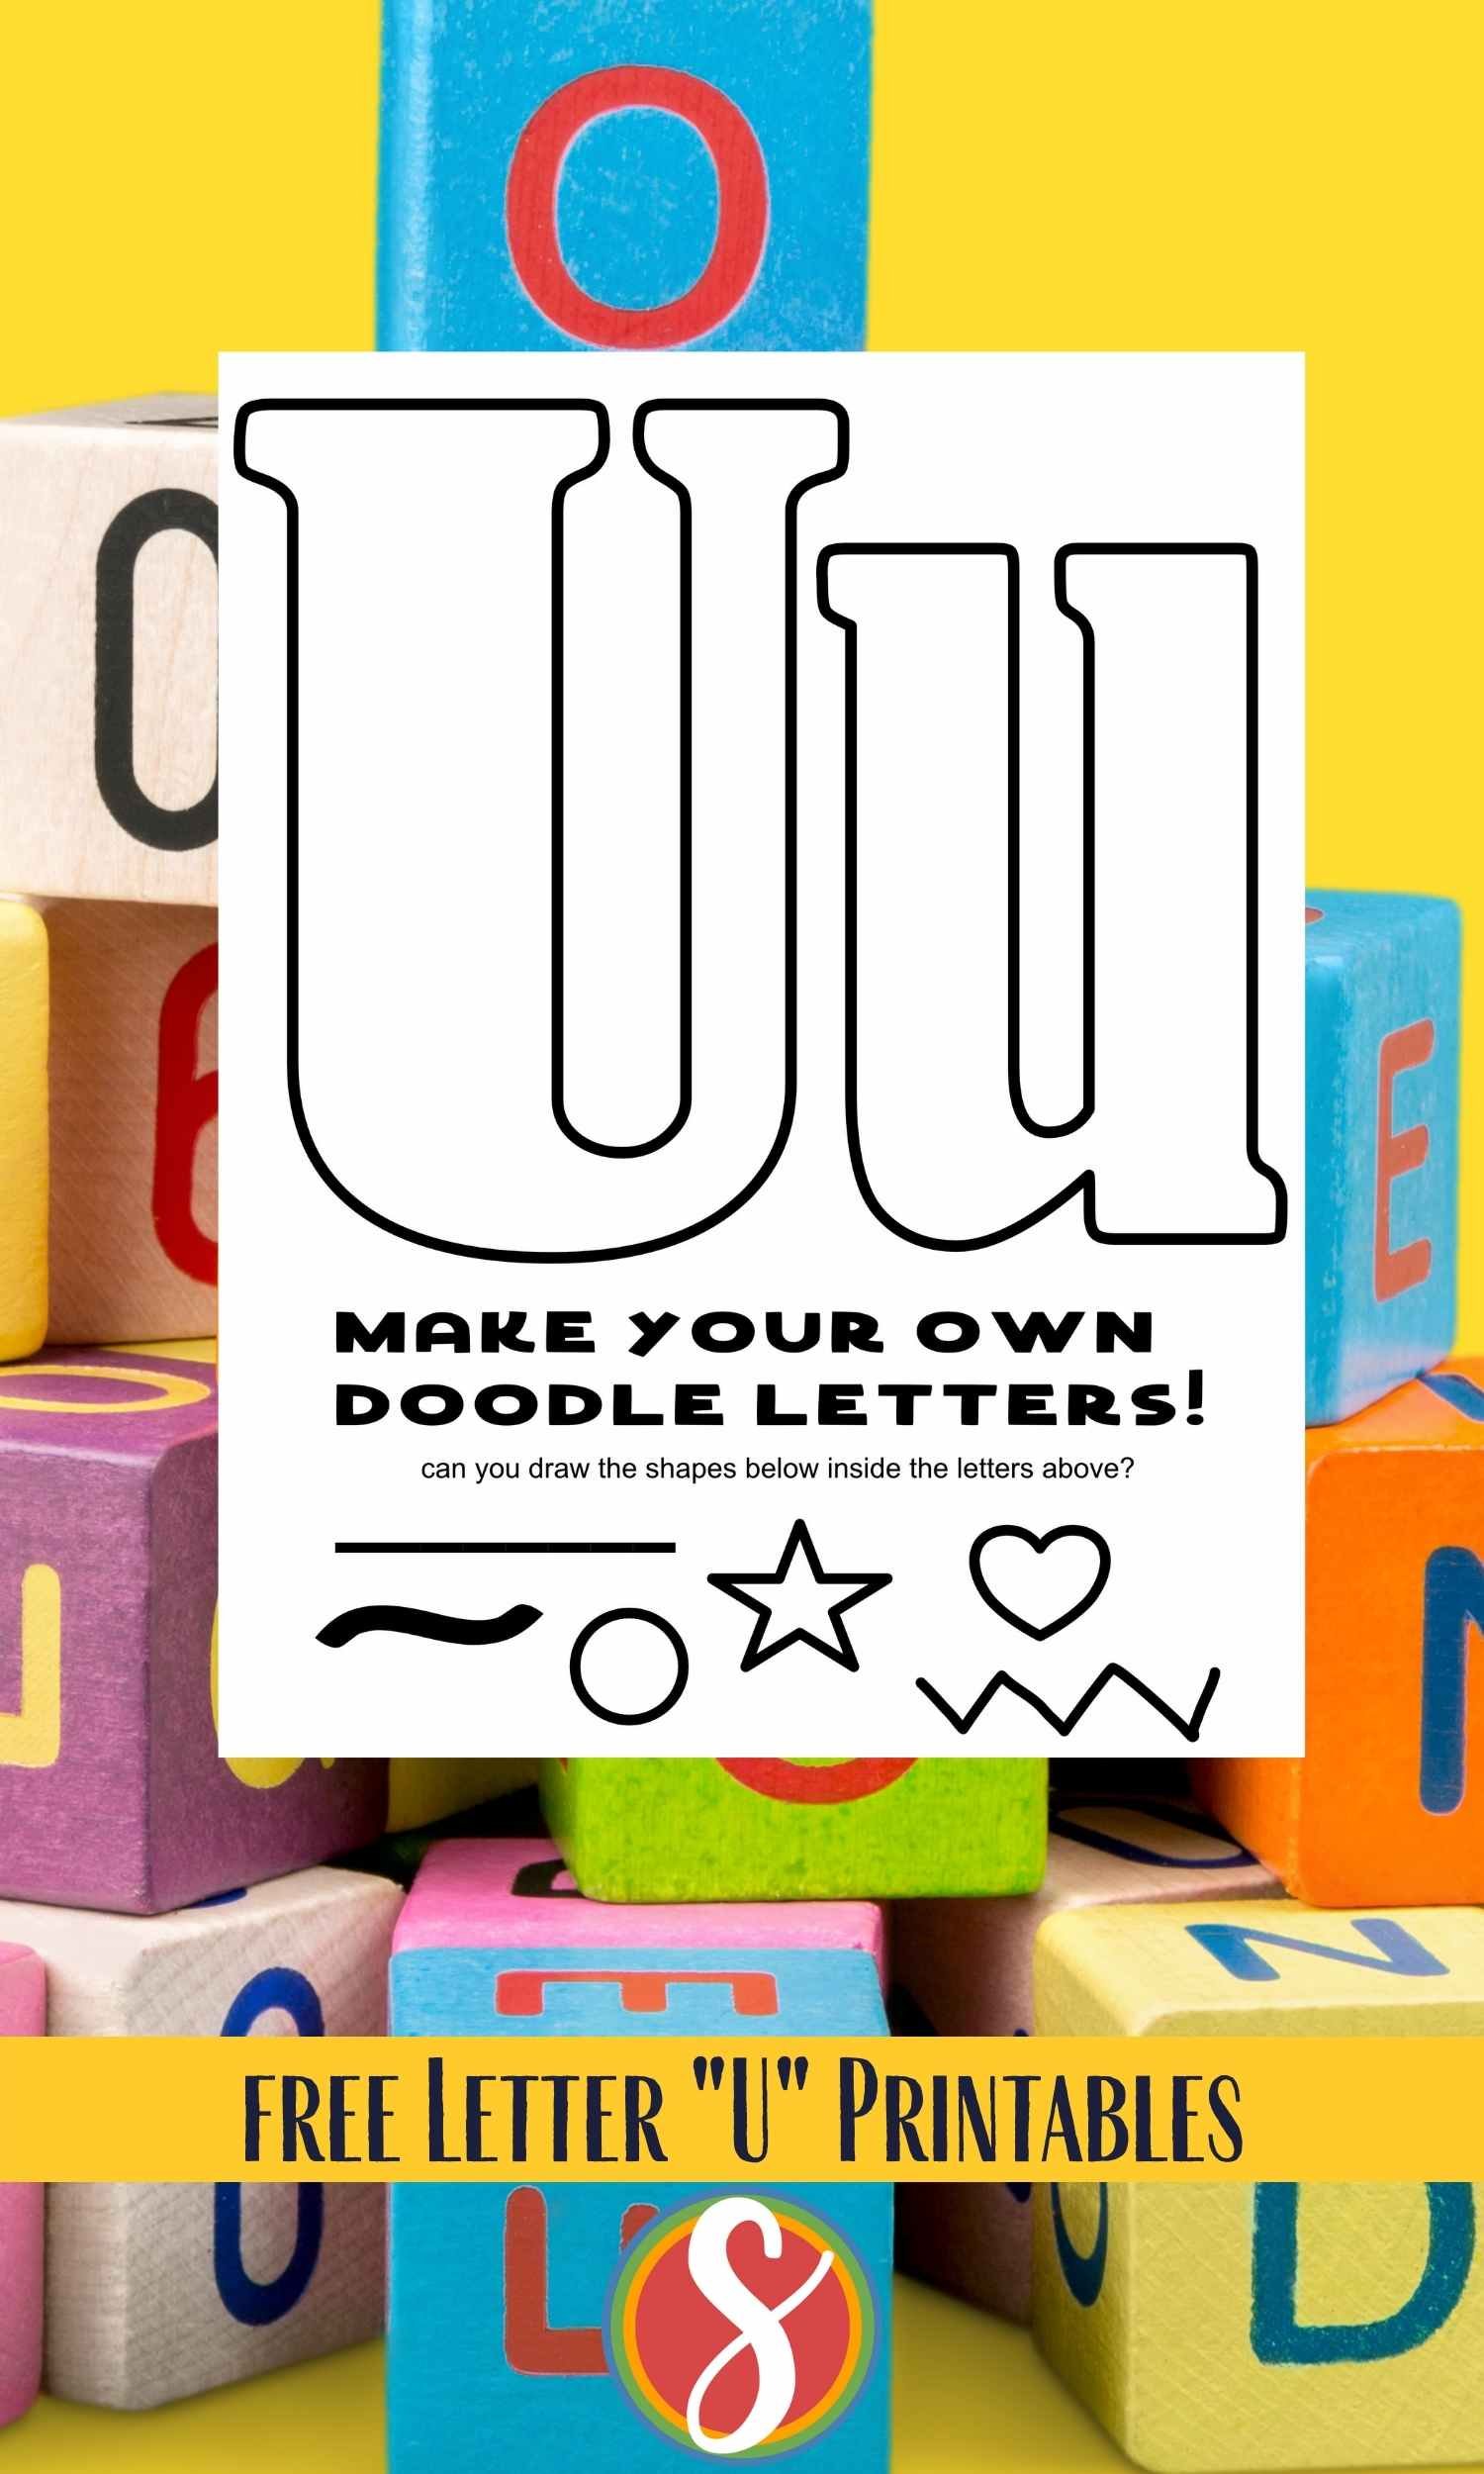 Empty bubble letters "Uu" and invitation do make your own doodles inside to color